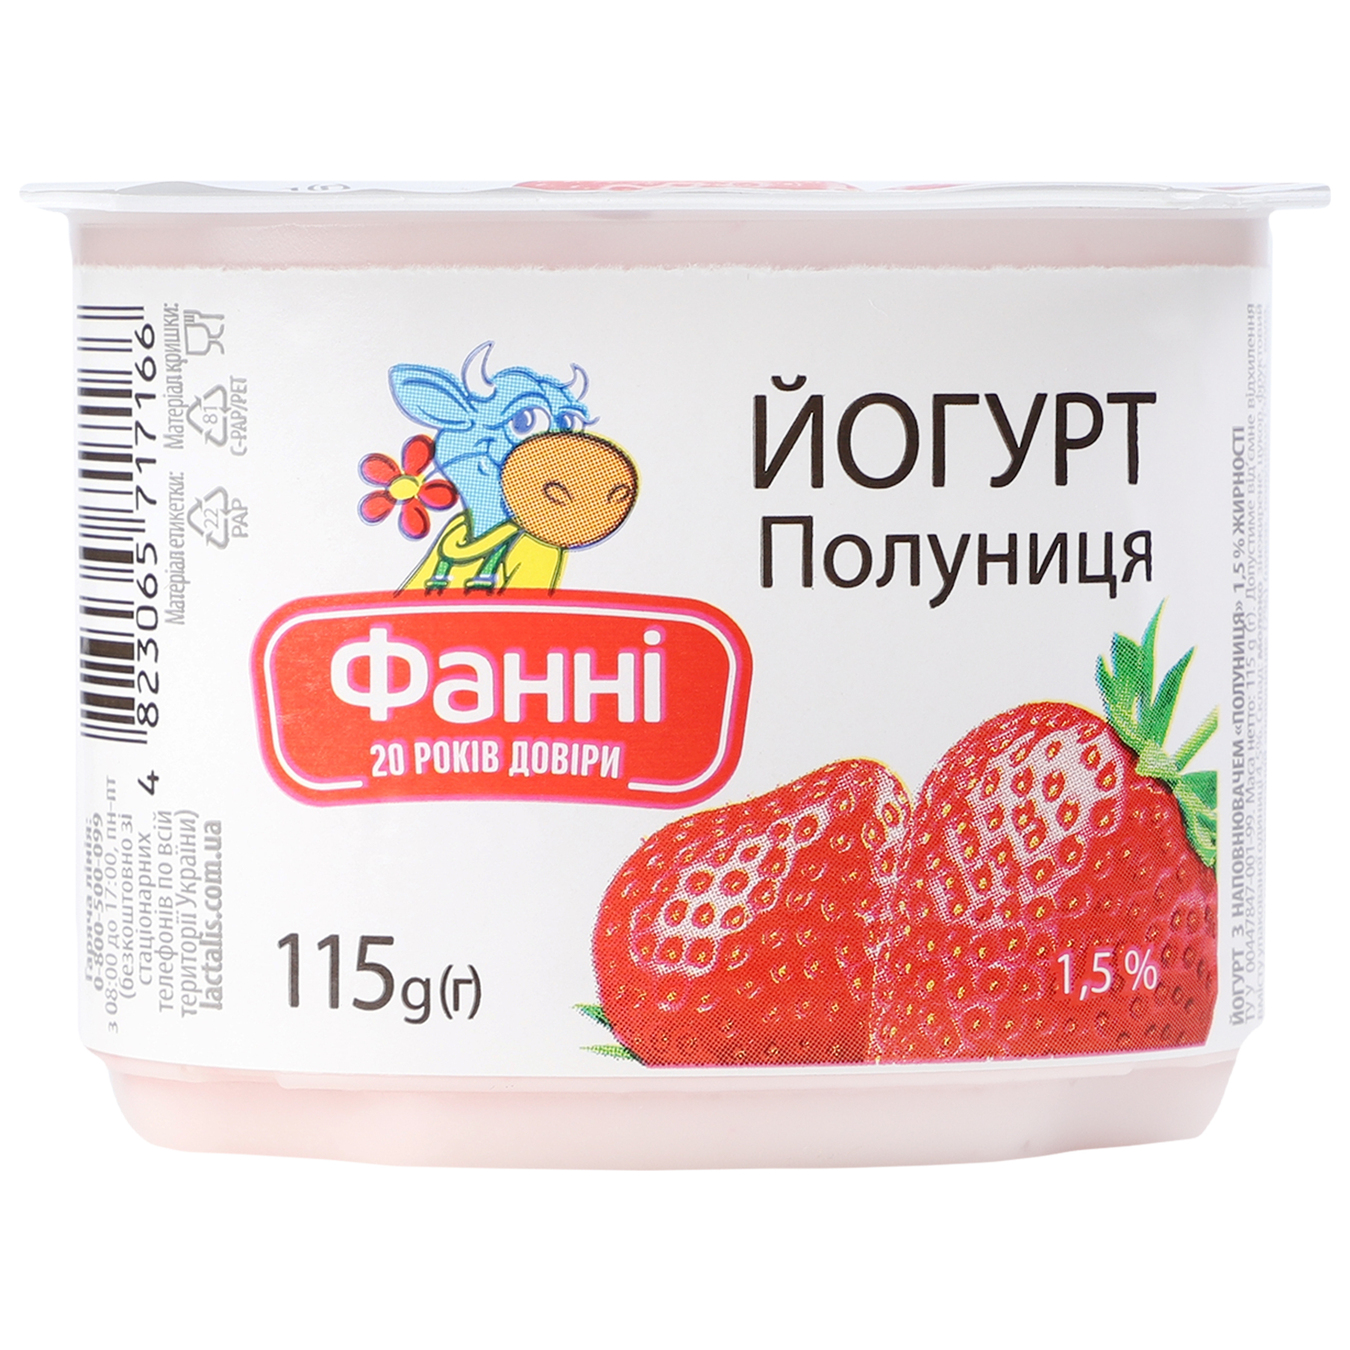 Fanny yogurt with strawberry filling cup 1.5% 115g 3